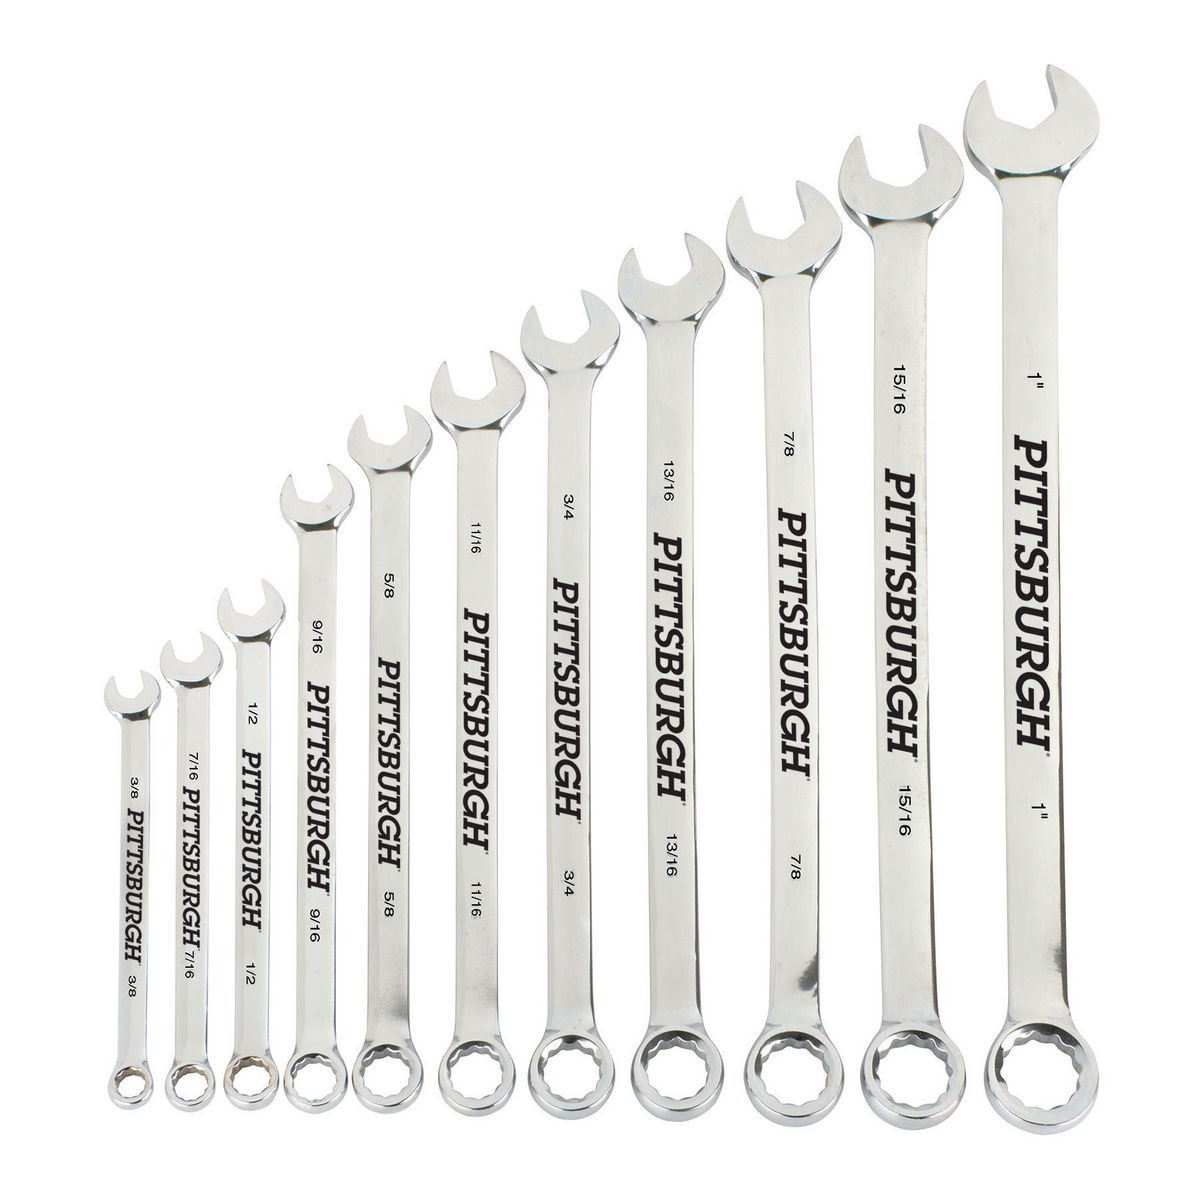 PITTSBURGH Fully Polished SAE Long Handle Combination Wrench Set 11 Pc. - Item 44718 / 60538